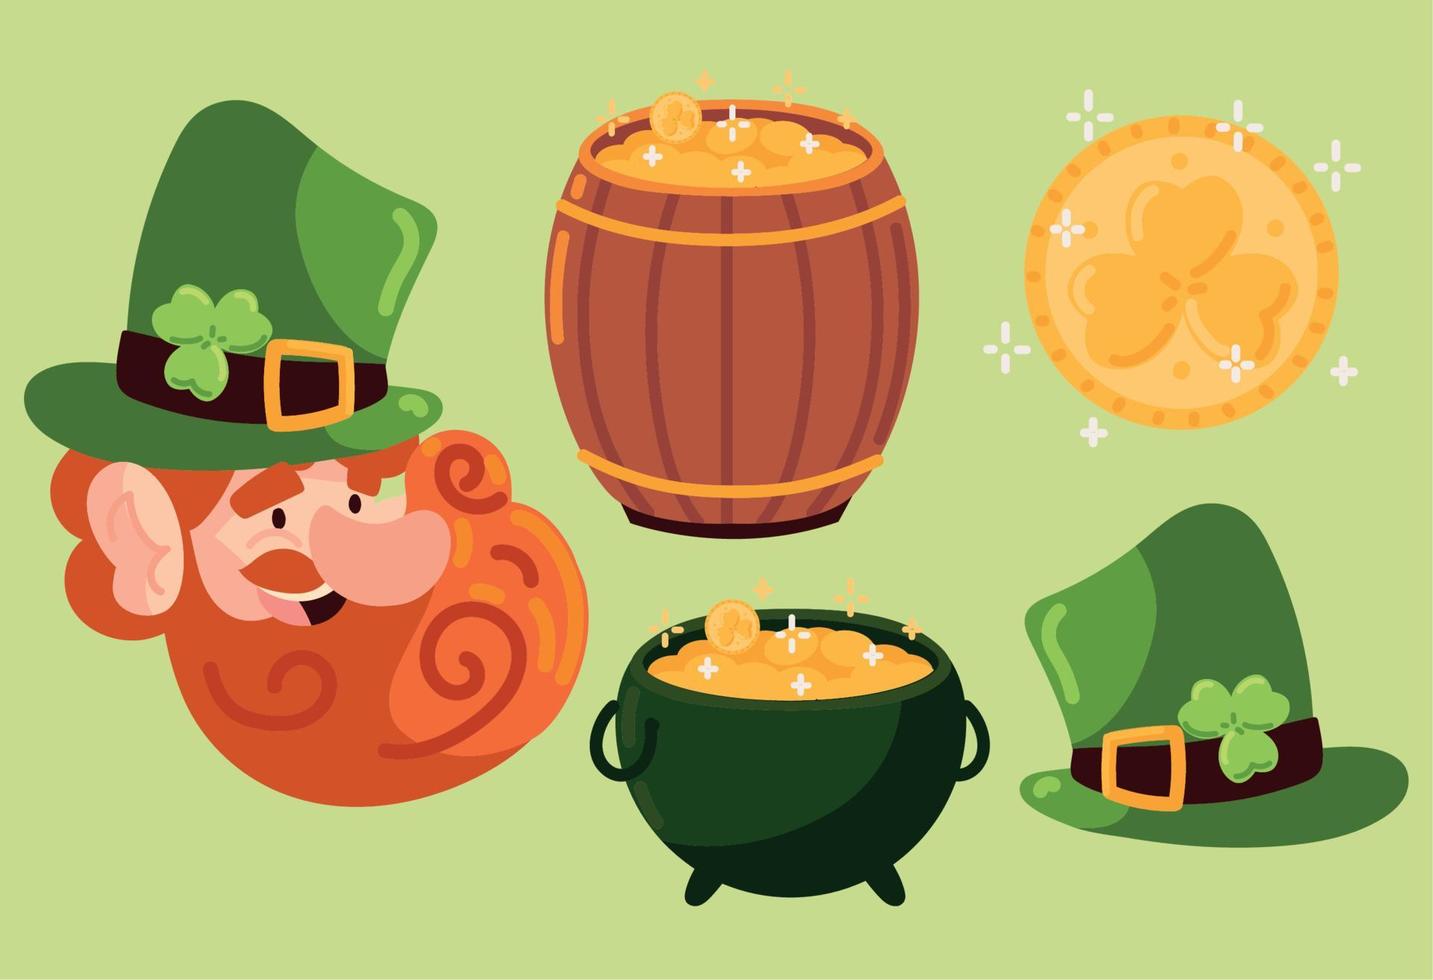 icons st patricks day vector